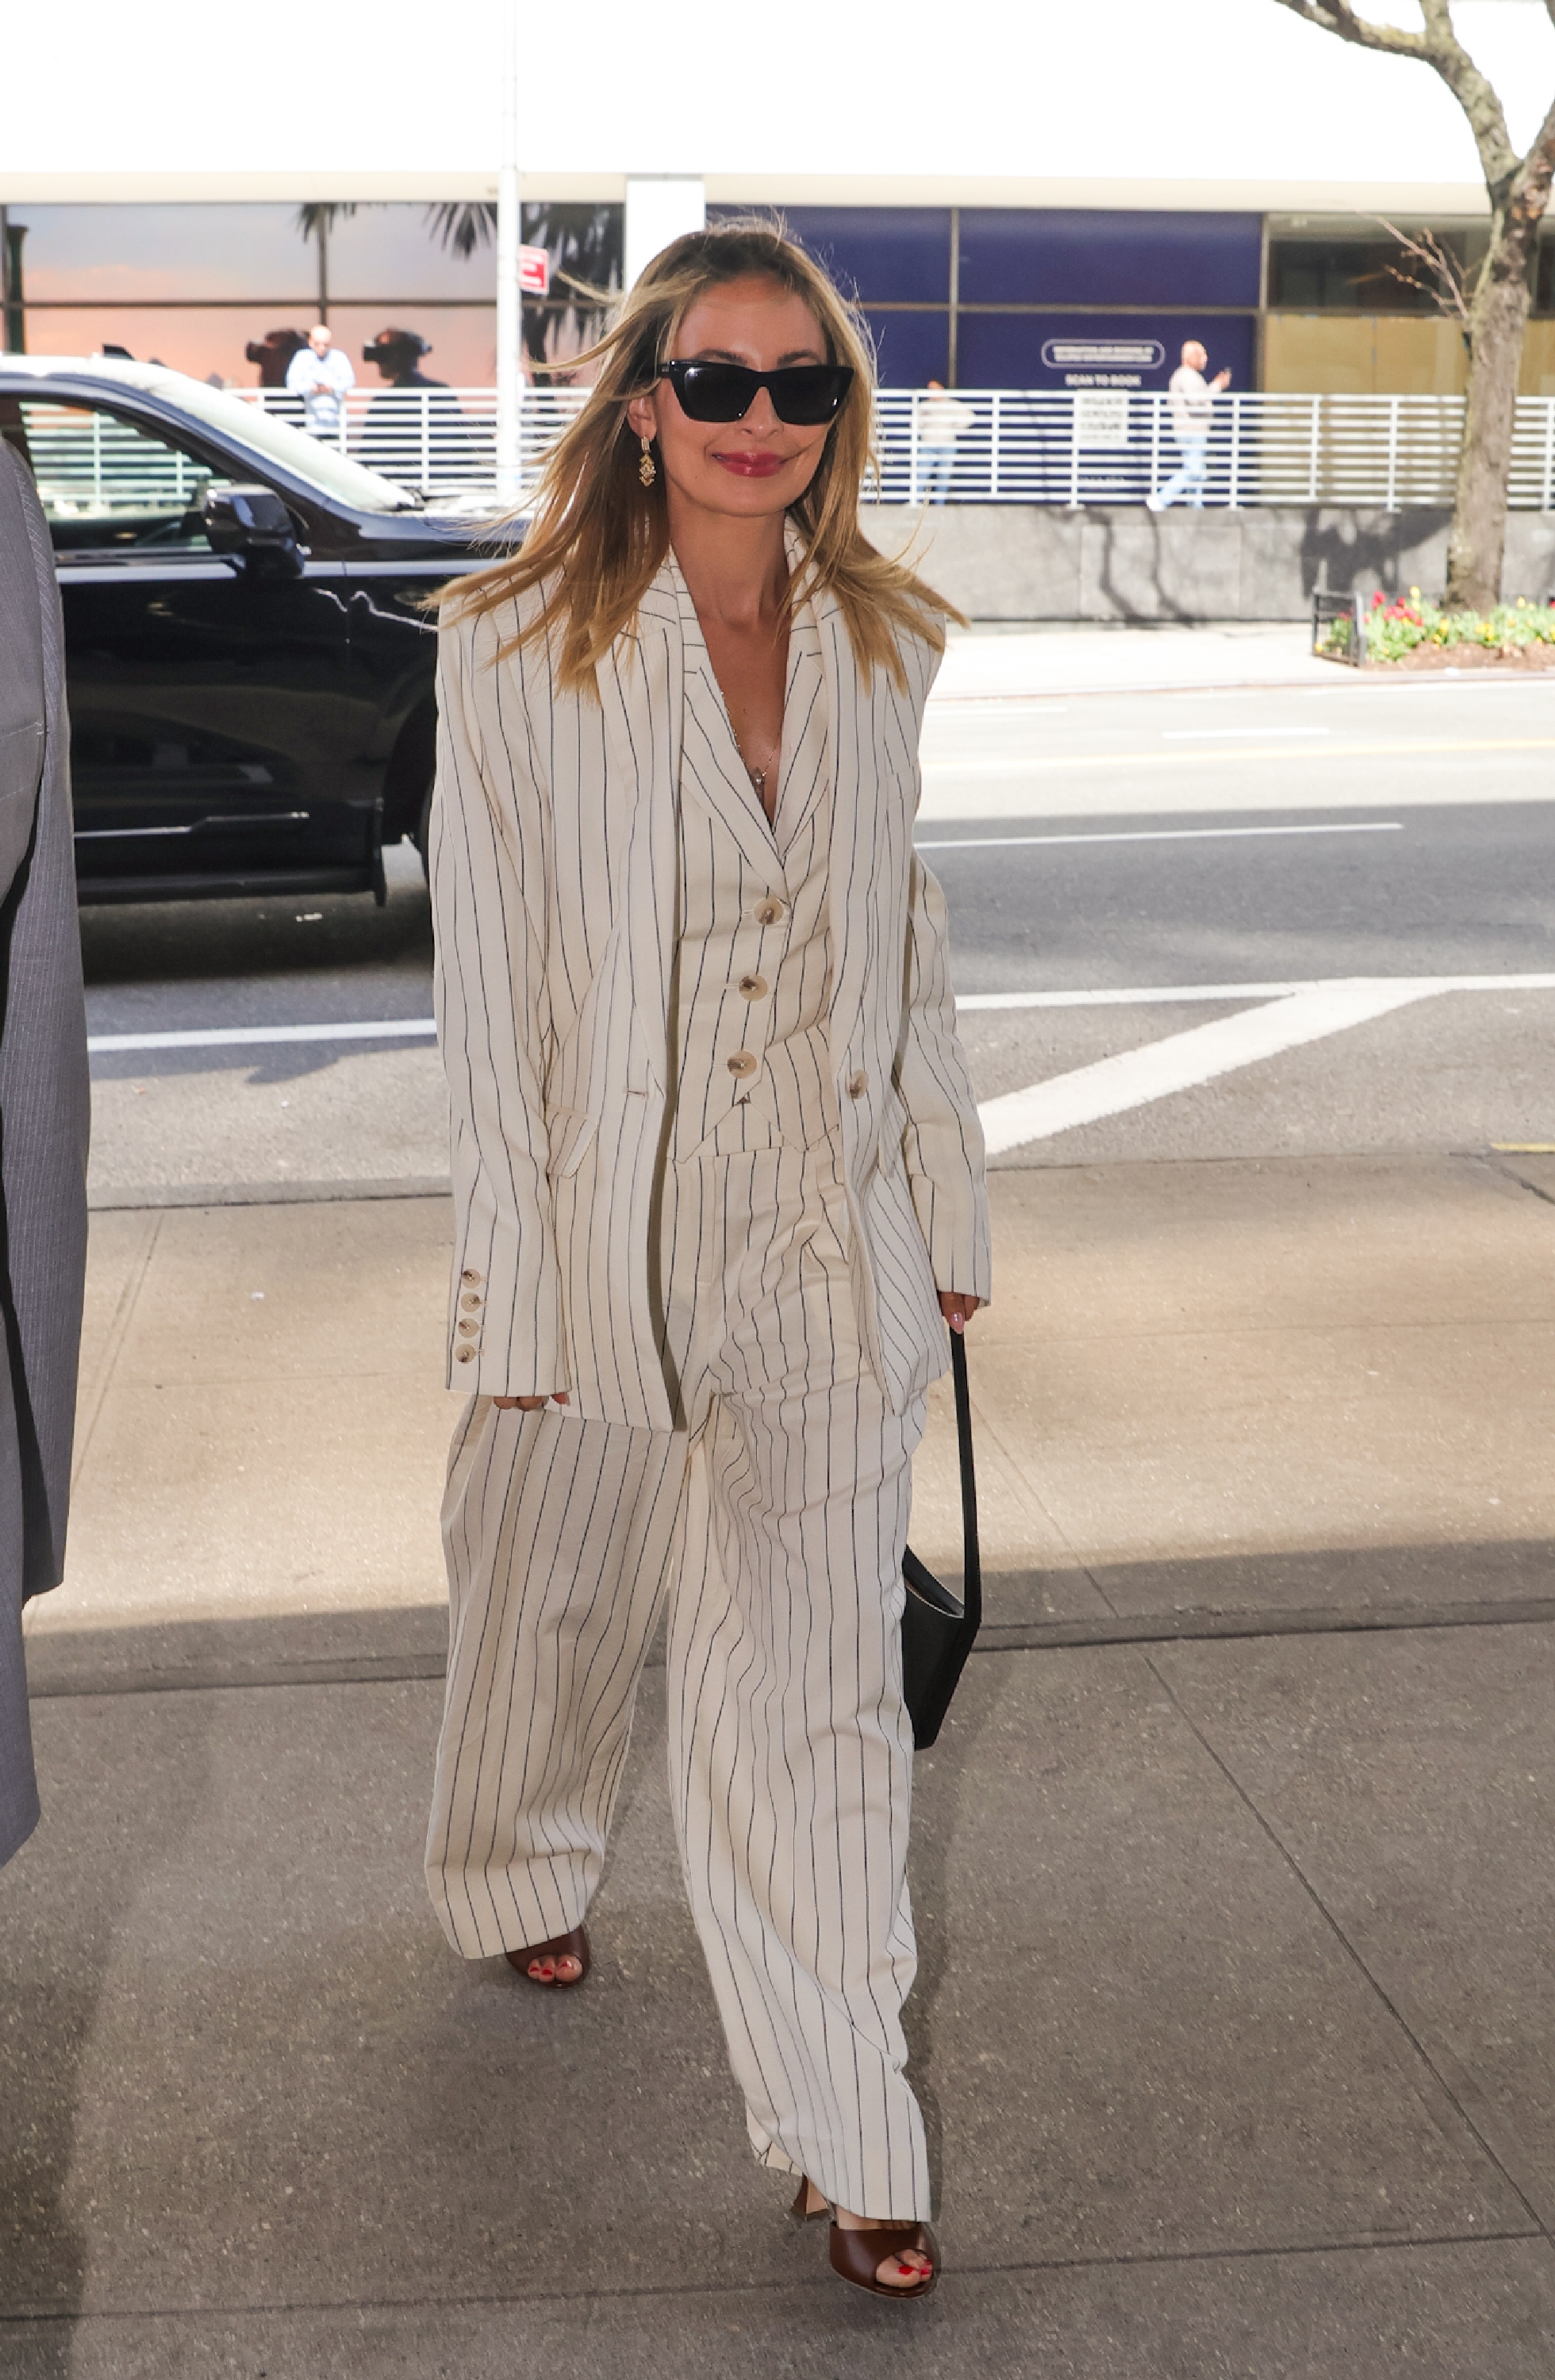 Nicole Richie wearing a white pinstripe three-piece suit with sunglasses.